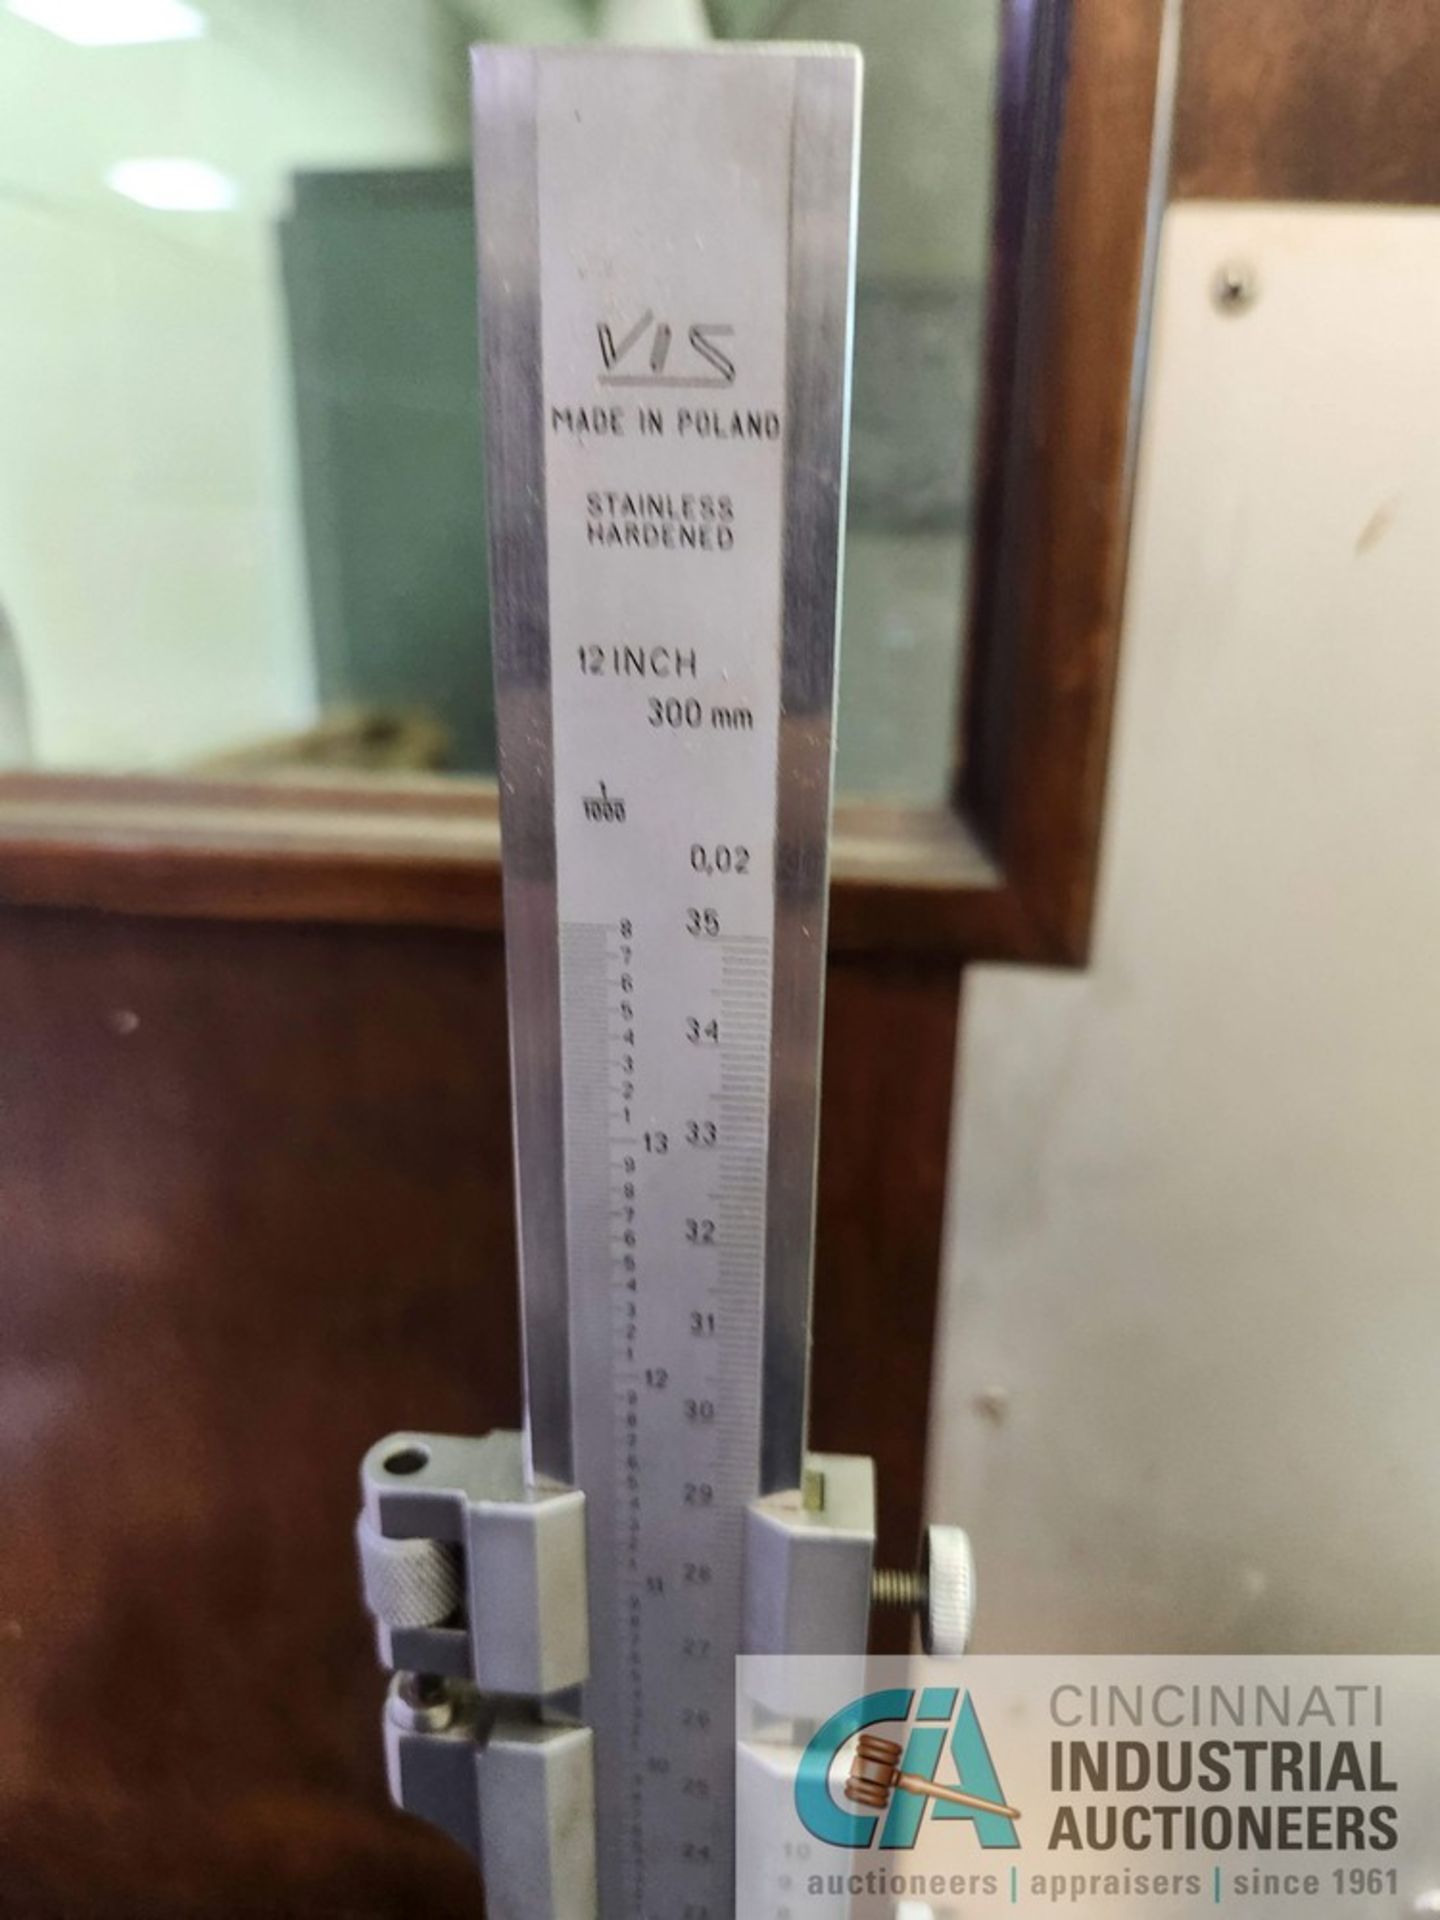 (LOT) DIAL INDICATOR STAND, 12" VIS HEIGHT GAGE - Image 2 of 3